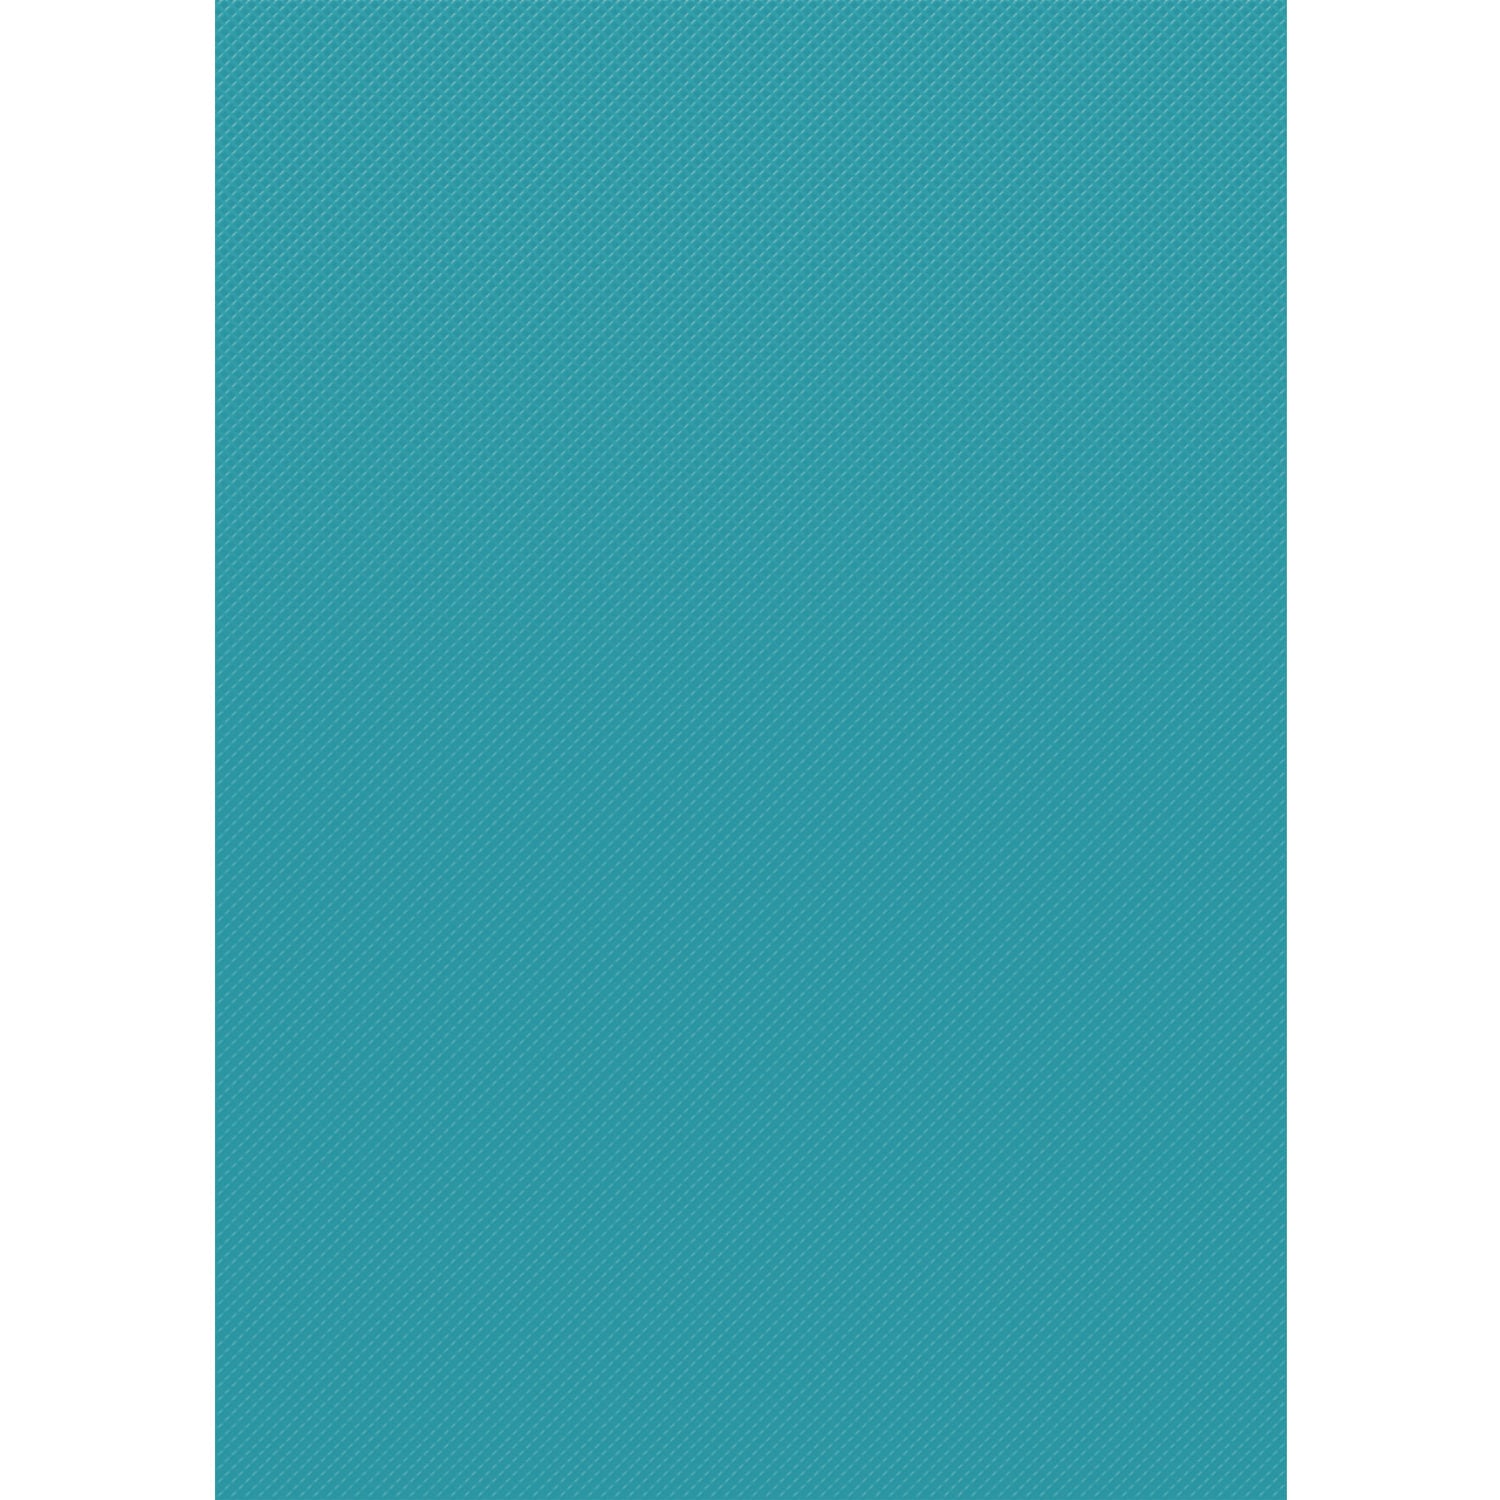 Better Than Paper Bulletin Board Roll, 4 ft x 12 ft, Teal - 2